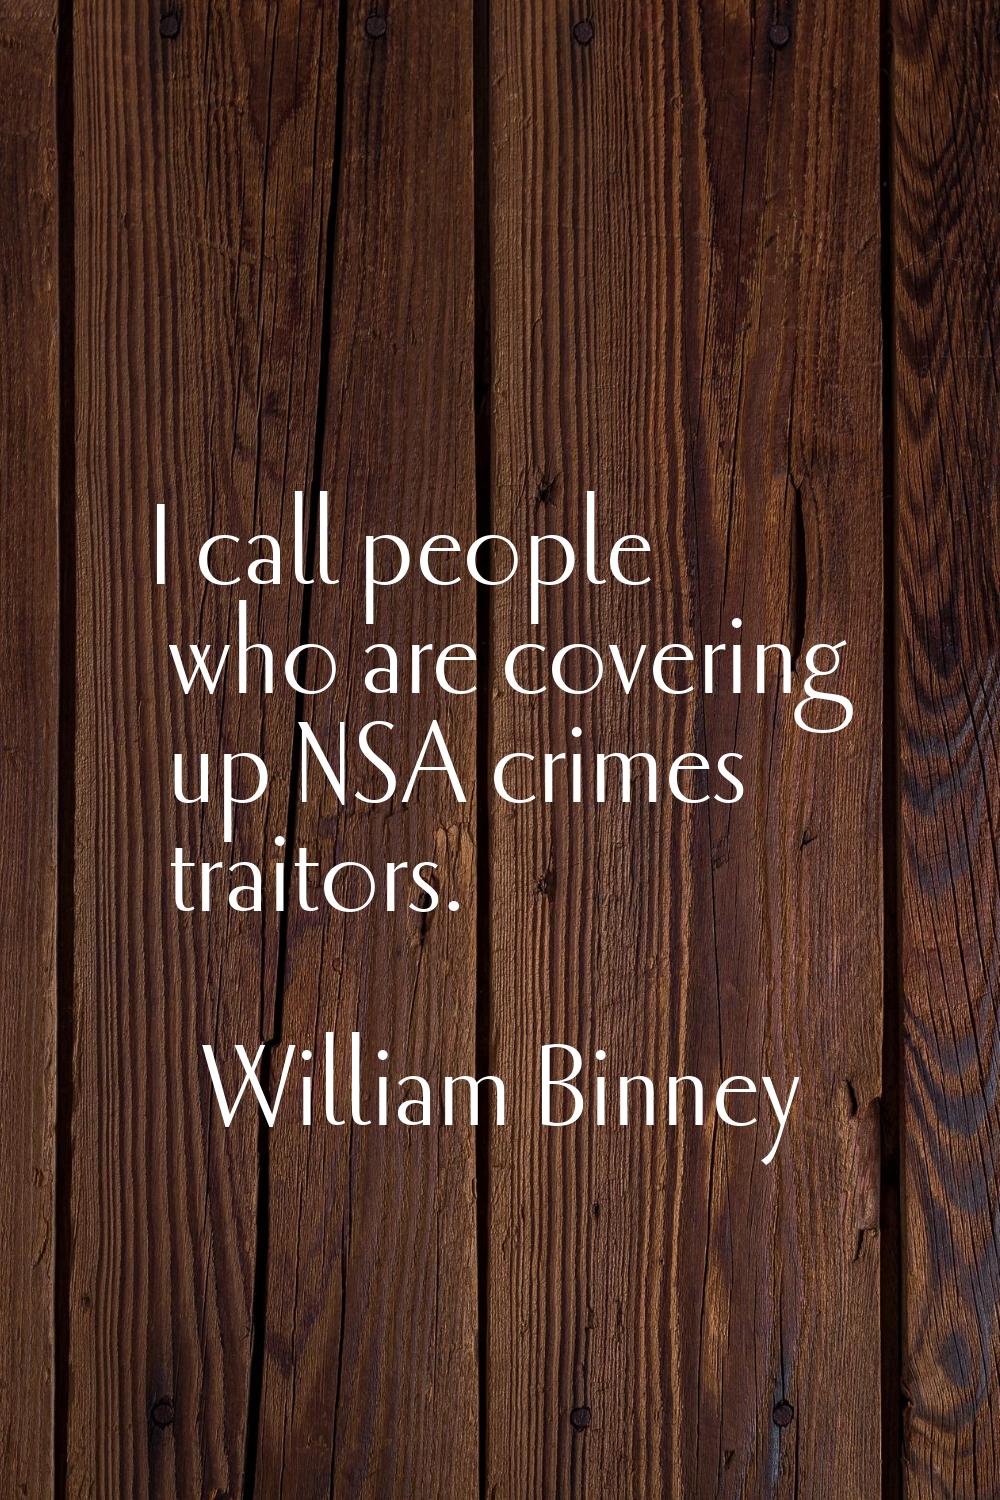 I call people who are covering up NSA crimes traitors.